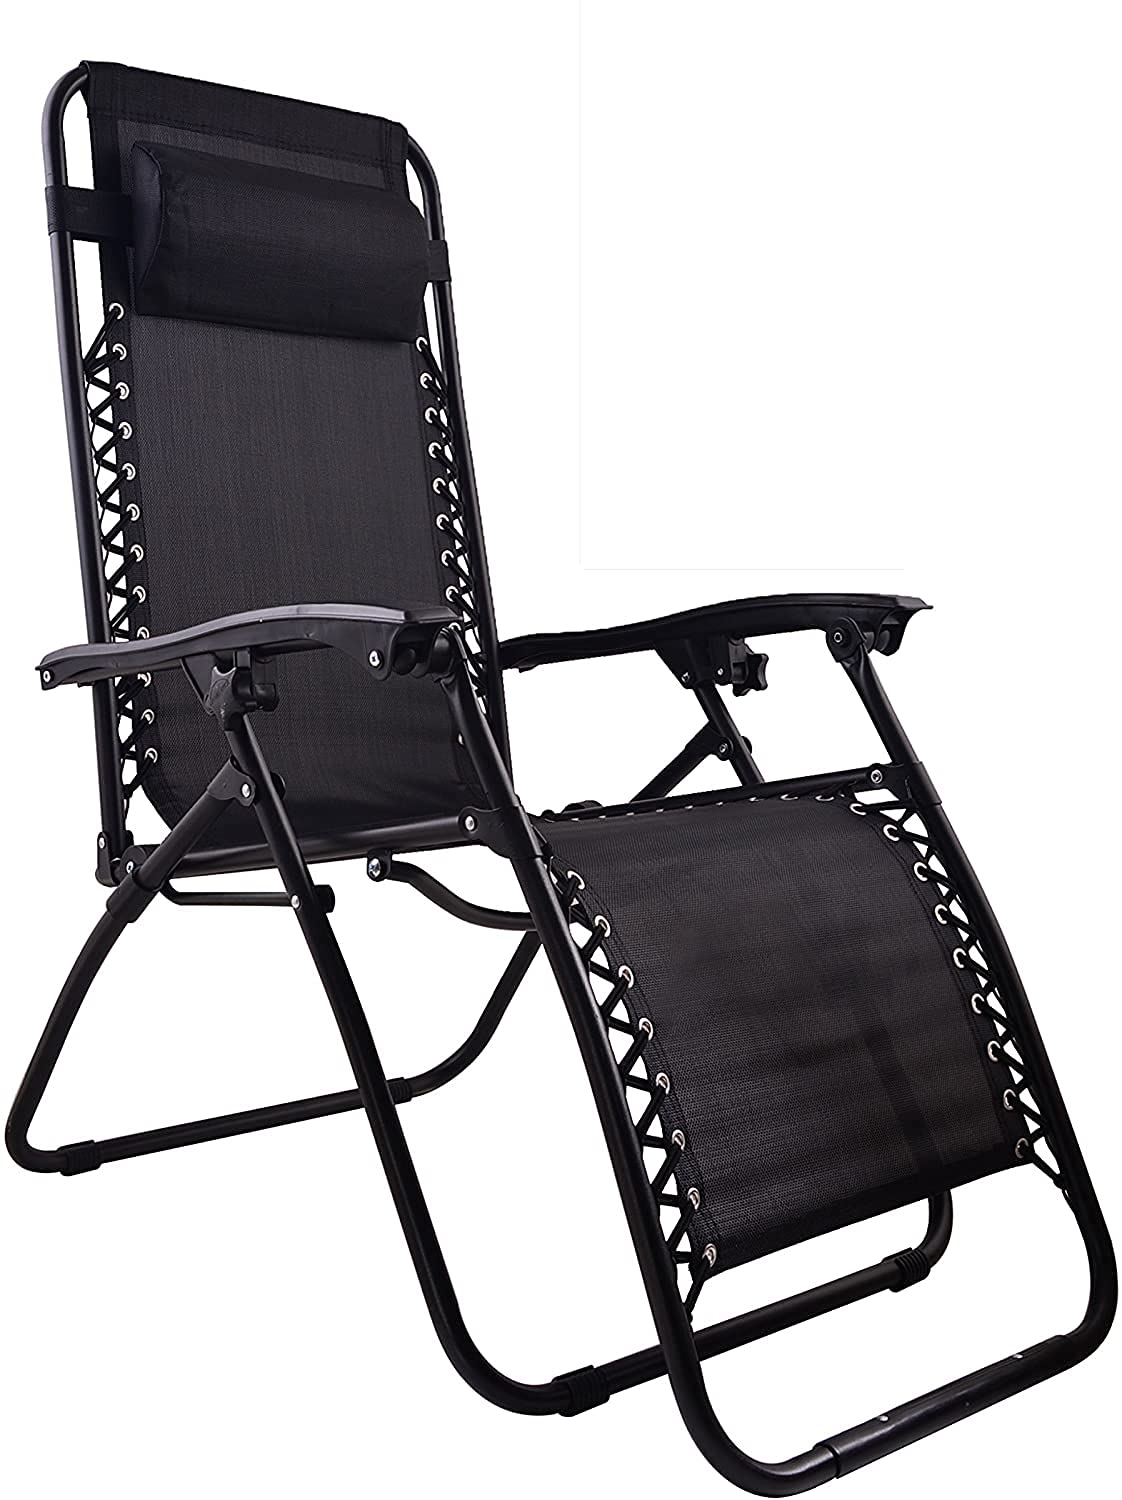 BTEXPERT CC5045B-2 Zero Gravity Chair Lounge Outdoor Patio Beach Yard Garden with Utility Tray Cup Holder Black Two Case Pack (Set of 2 pcs), Piece Two Piece